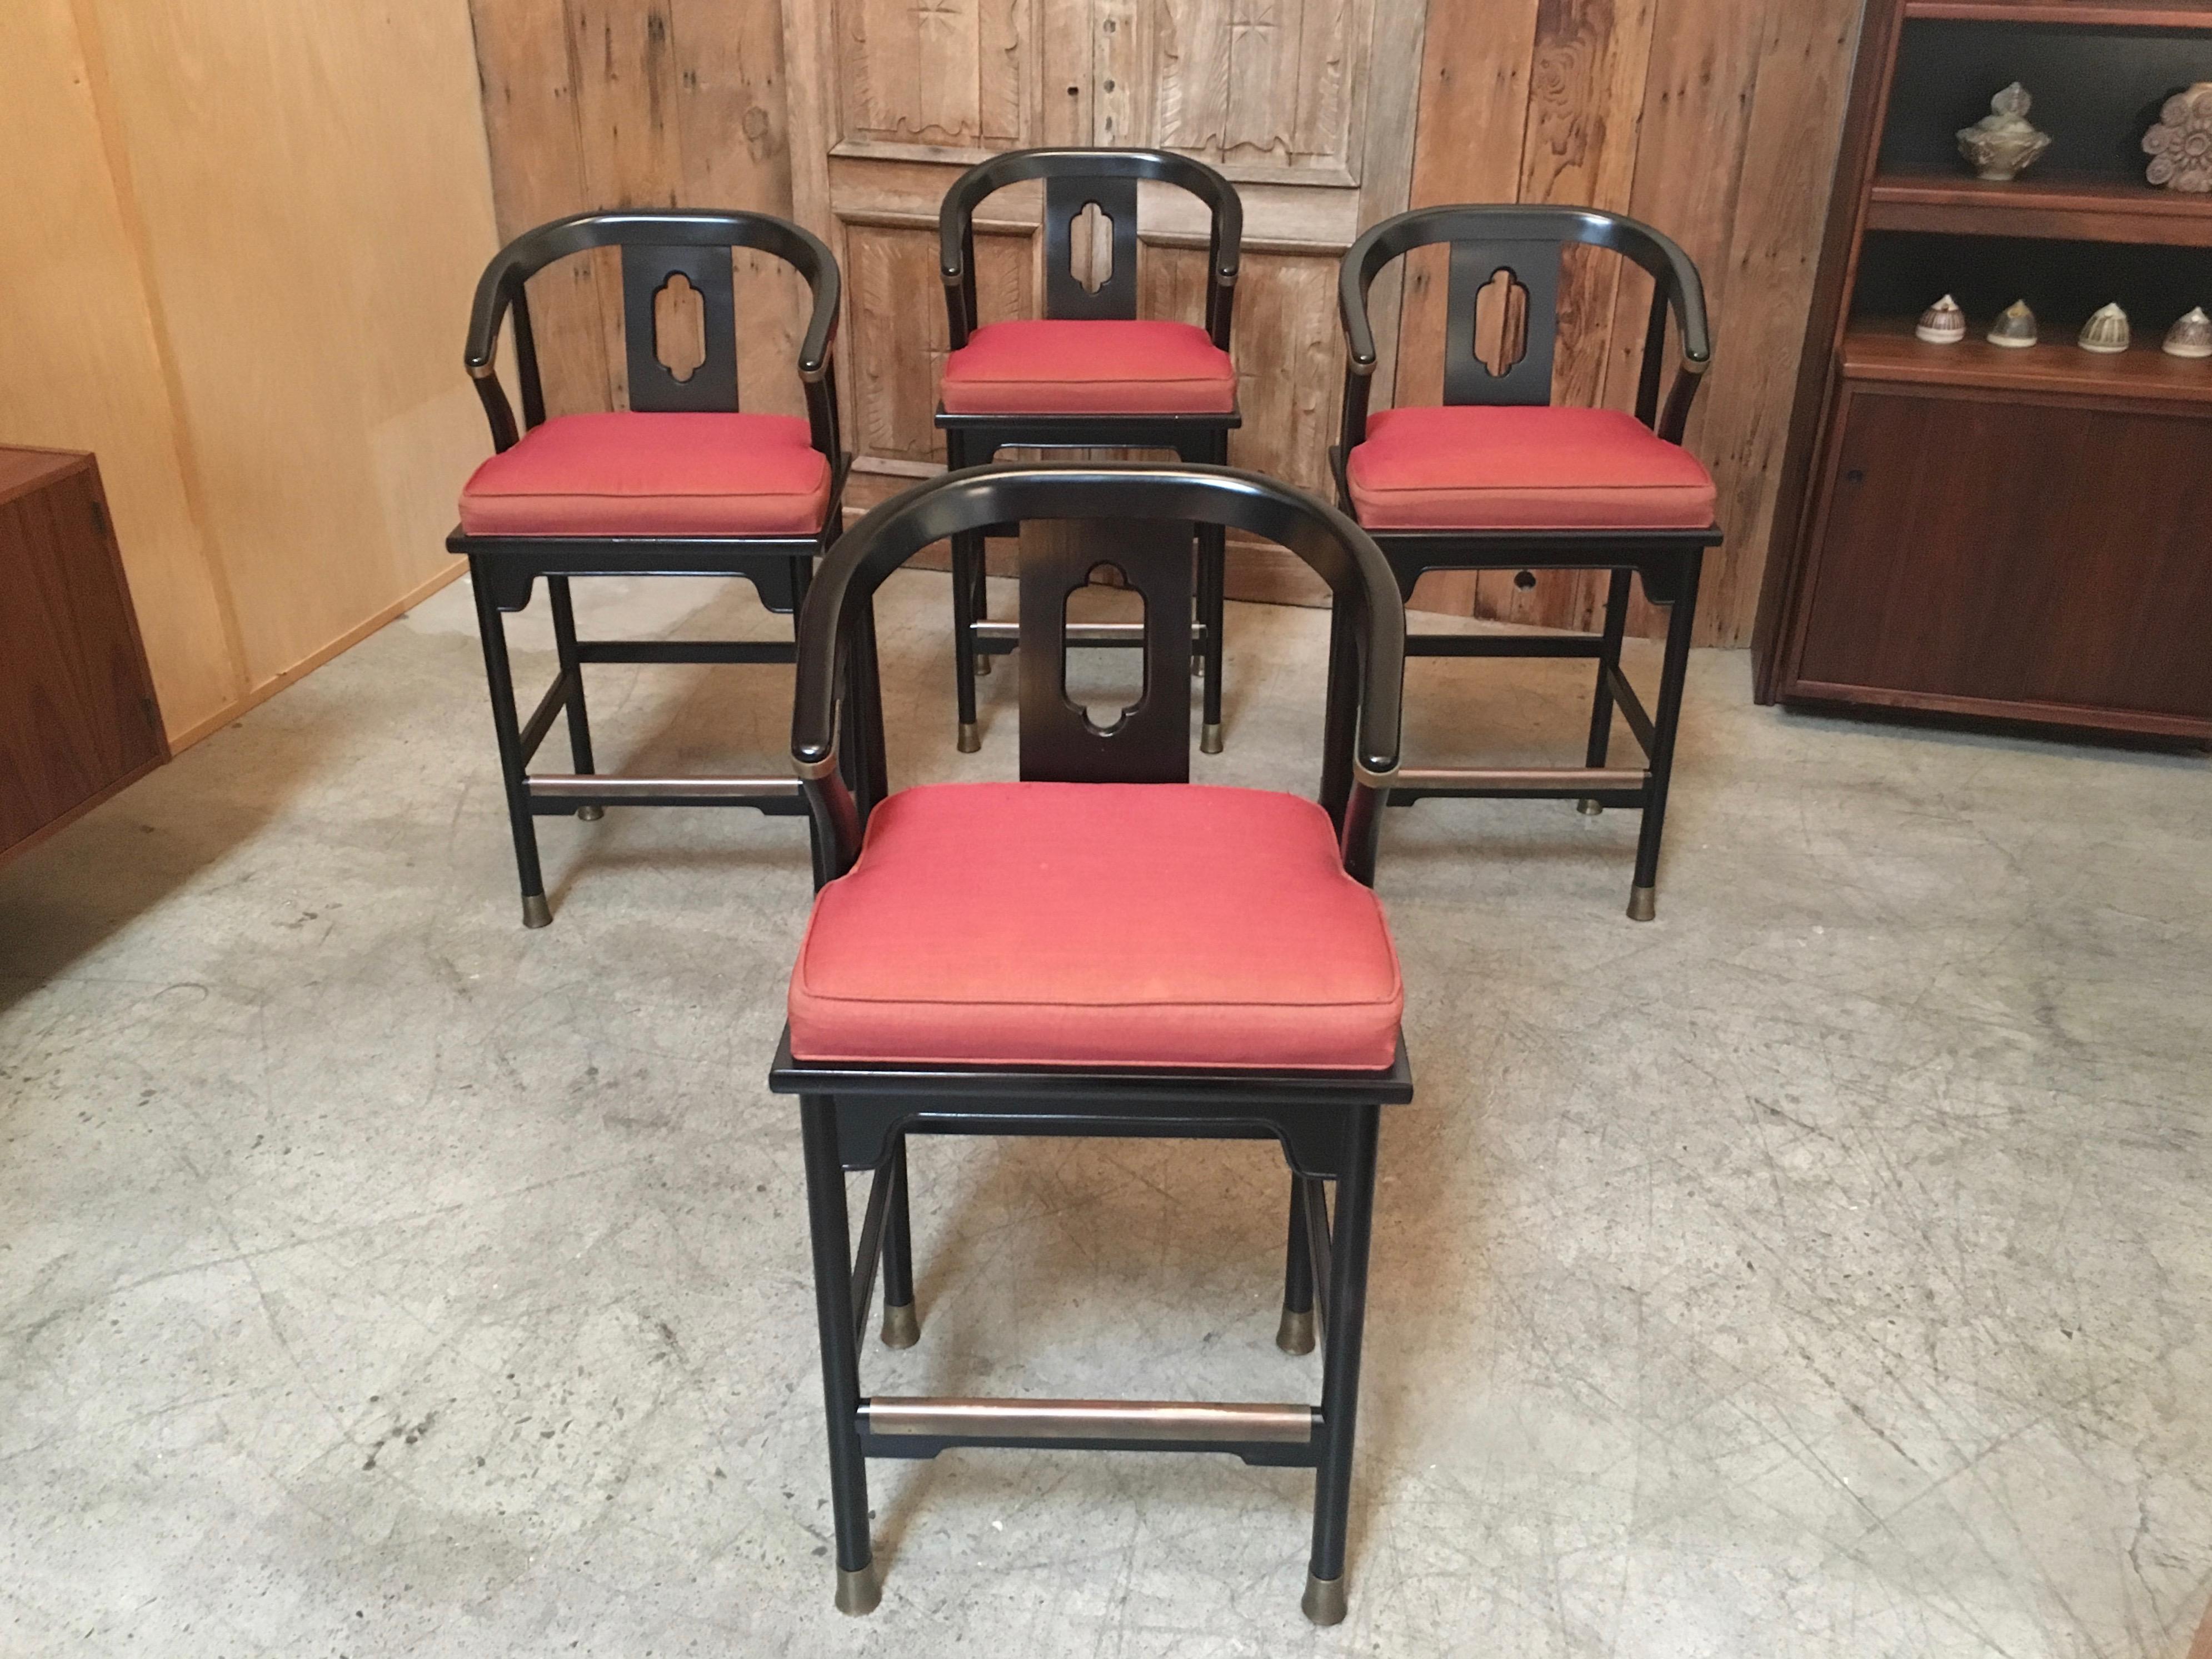 Mid-Century Modern Asian barstools made by Century chair co. ebonized wood with solid brass accents.